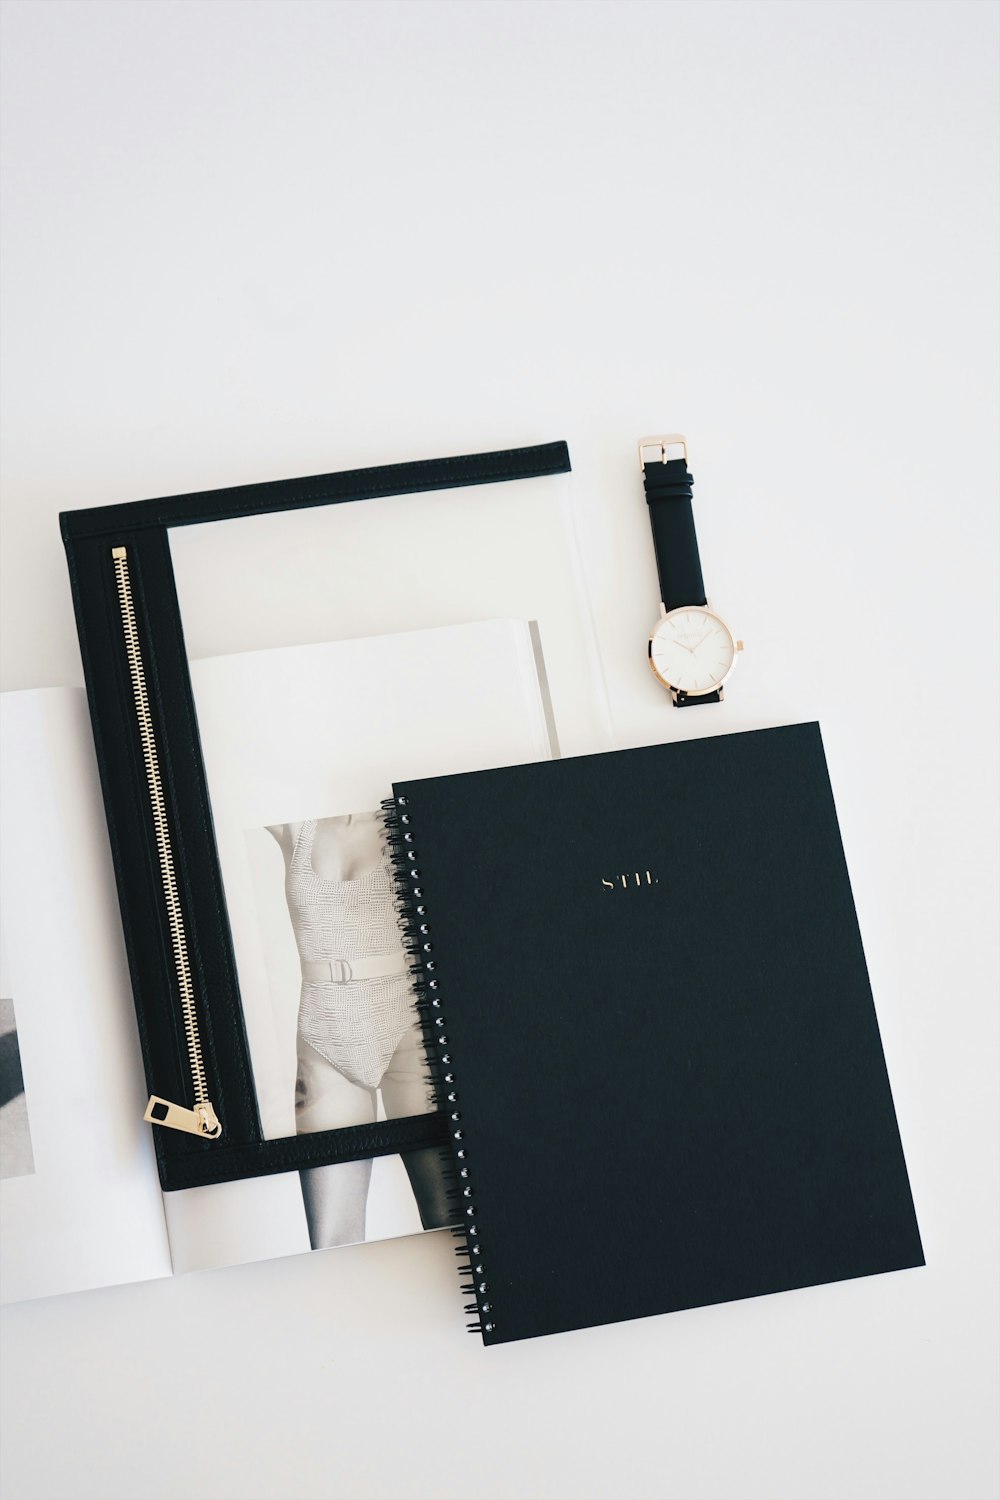 flat lay photo of watch, notebook, and watch